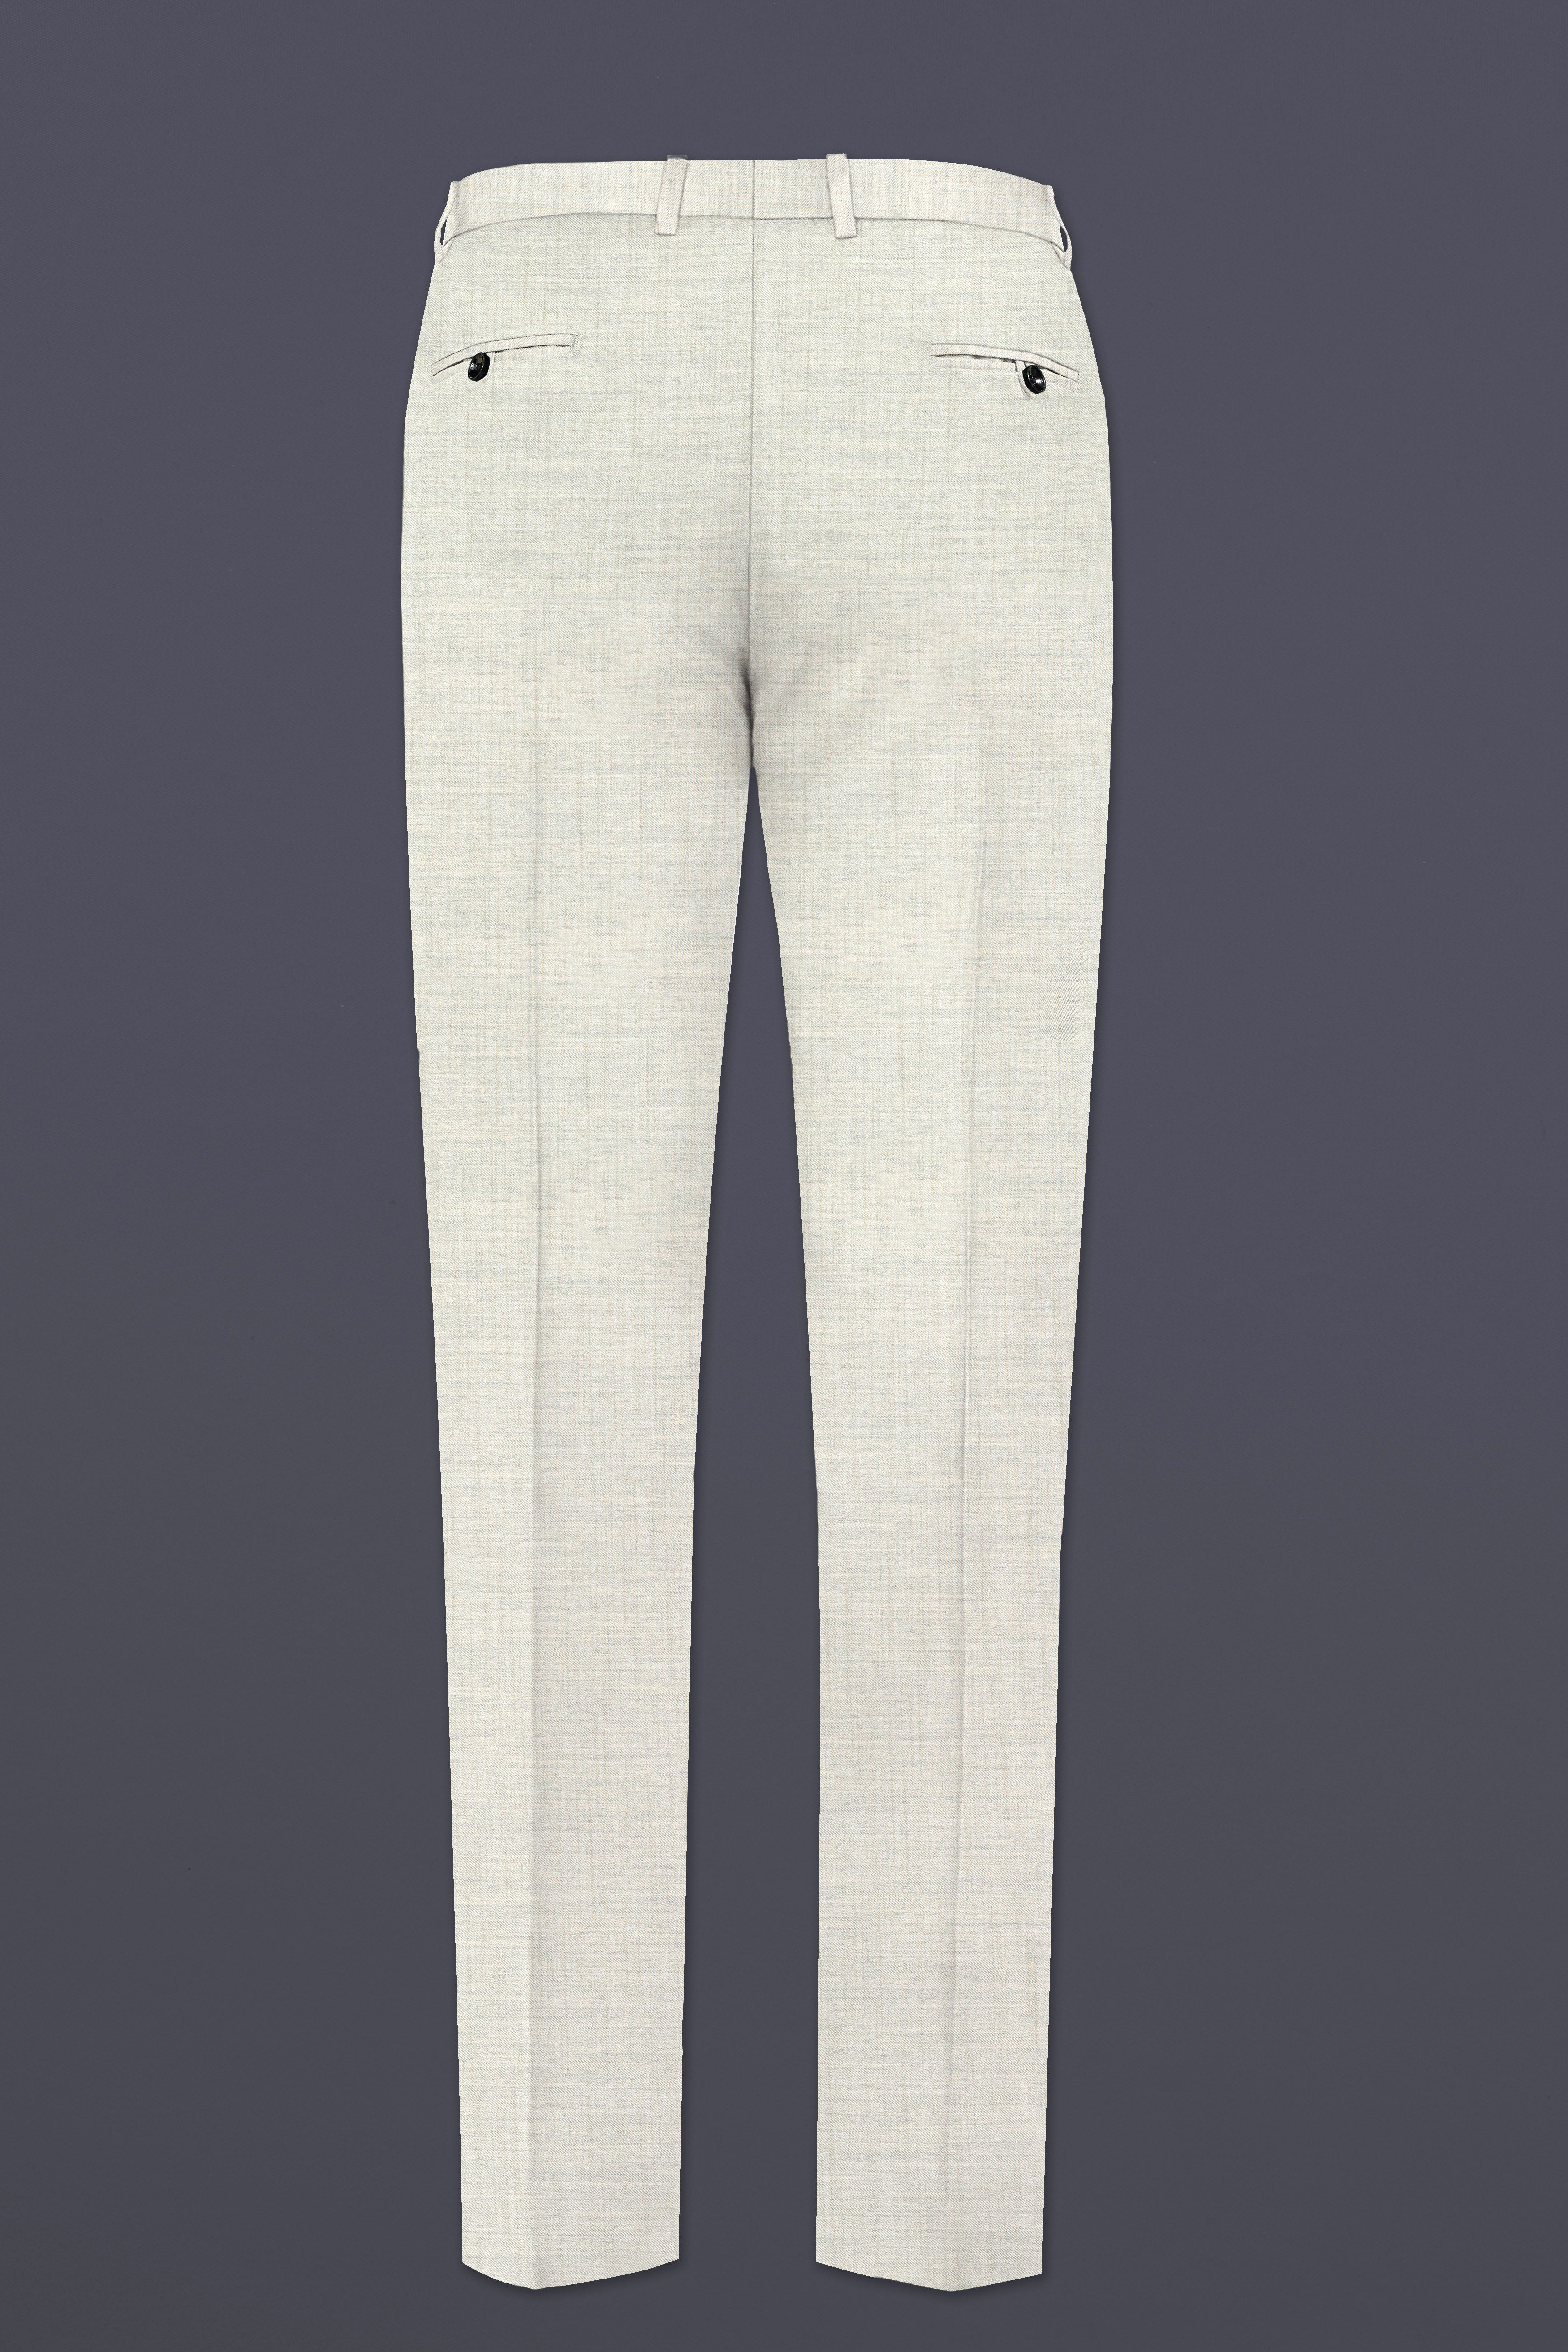 Spanish Gray Textured Wool Blend Pant